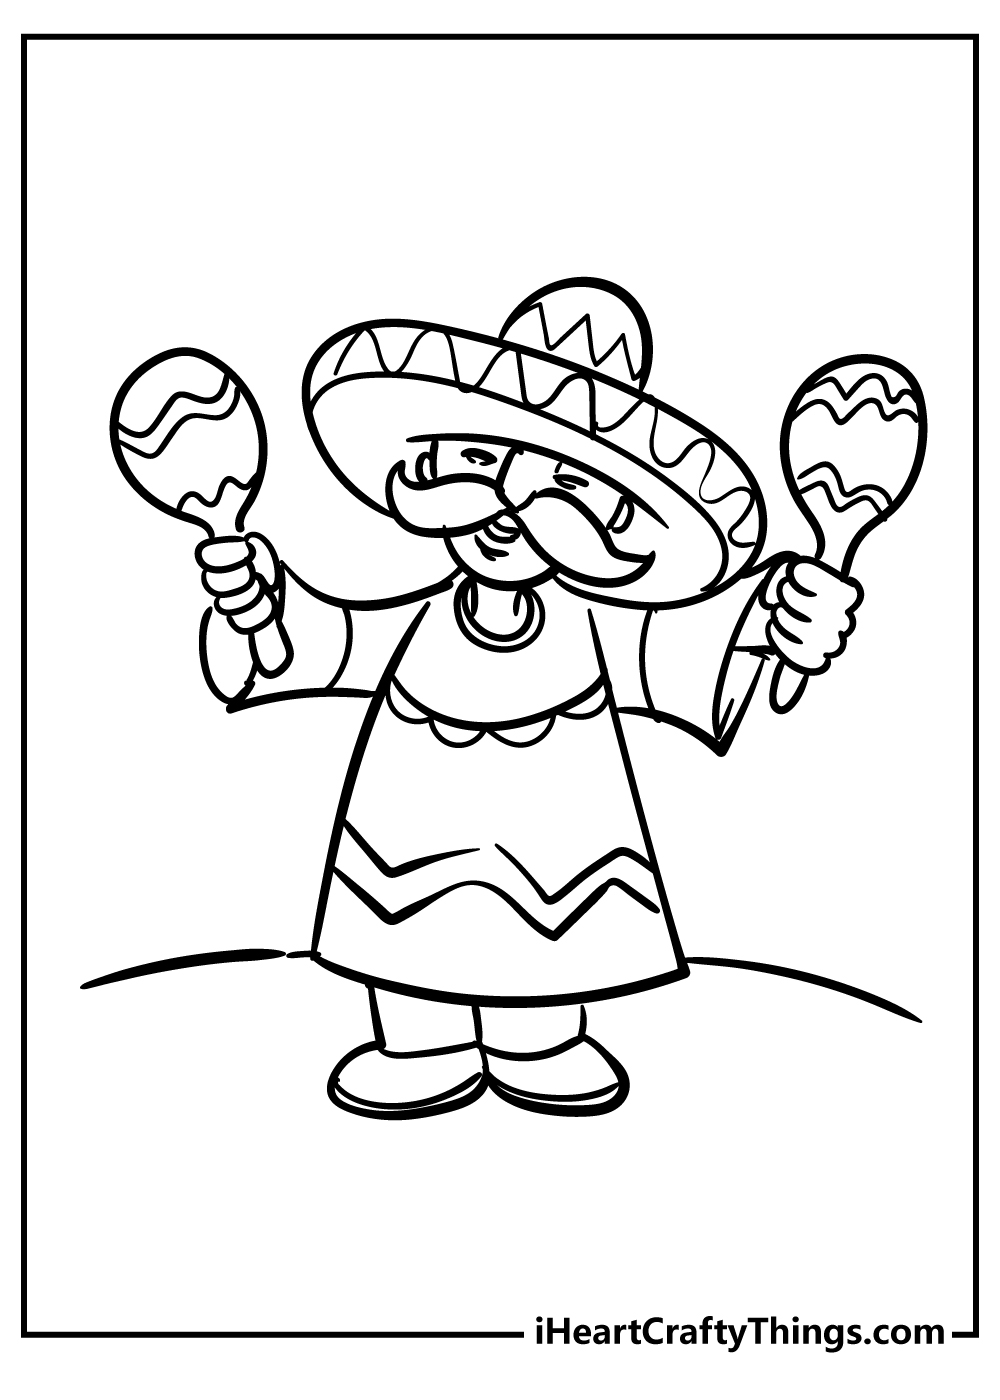 Free mexican flag coloring sheet download free mexican off